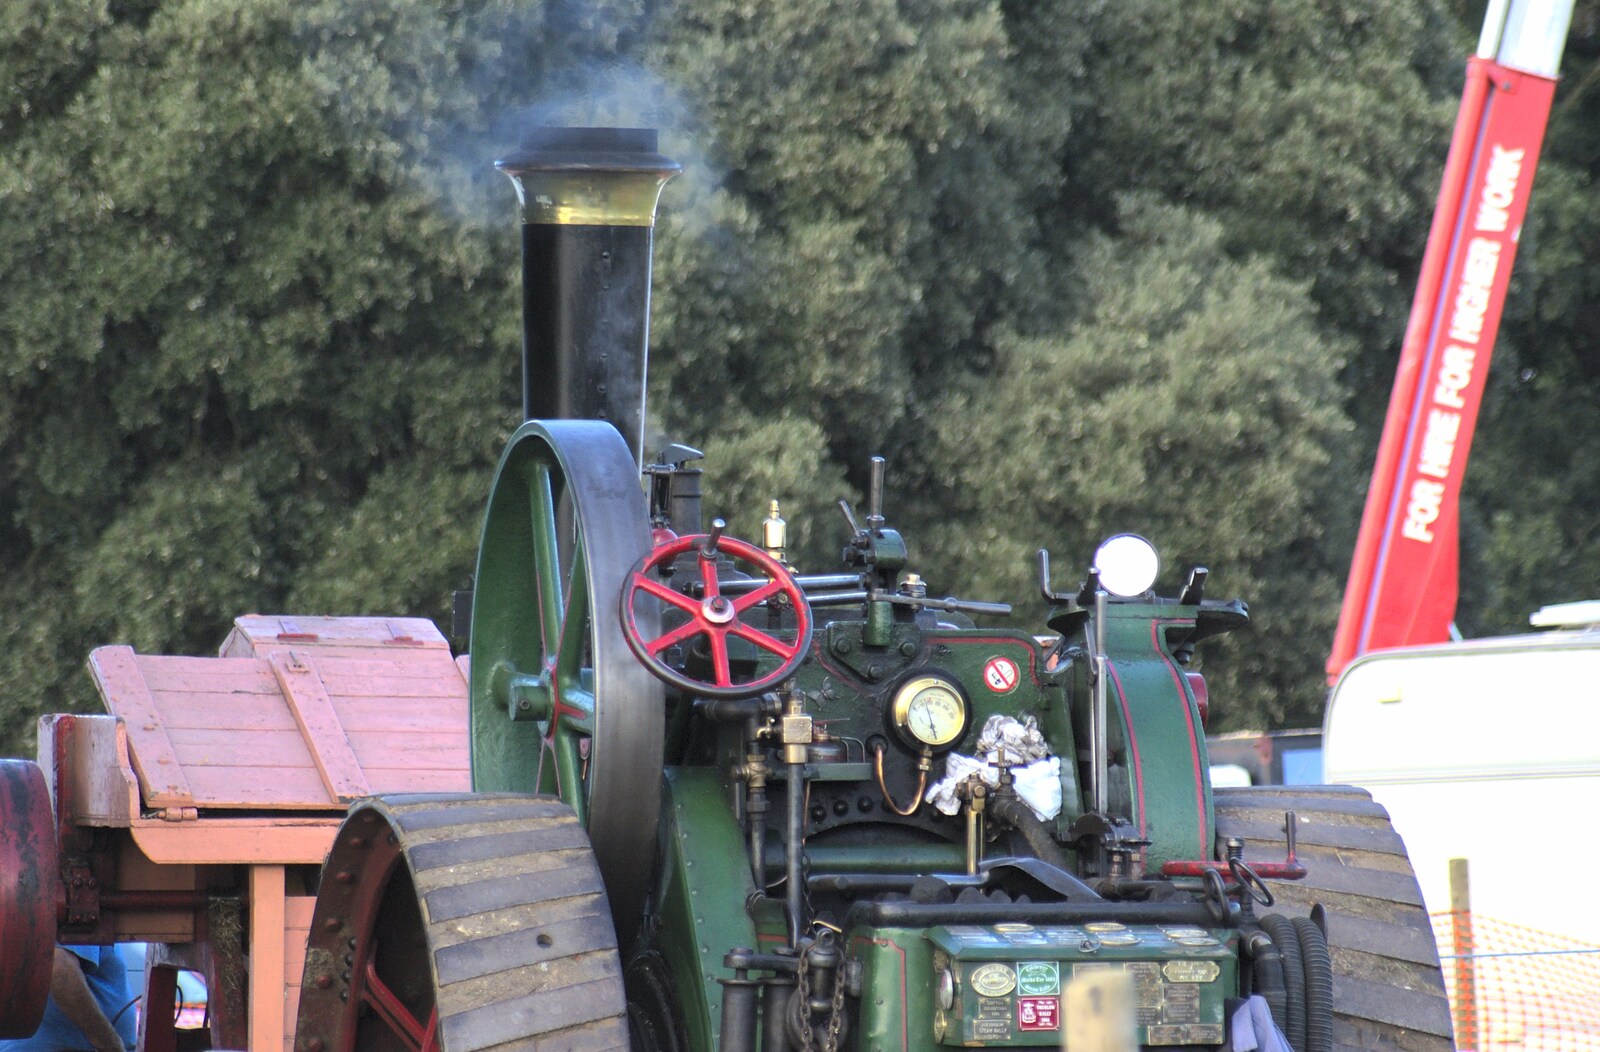 A smoking traction engine from The Eye Show, Palgrave, Suffolk - 30th August 2010